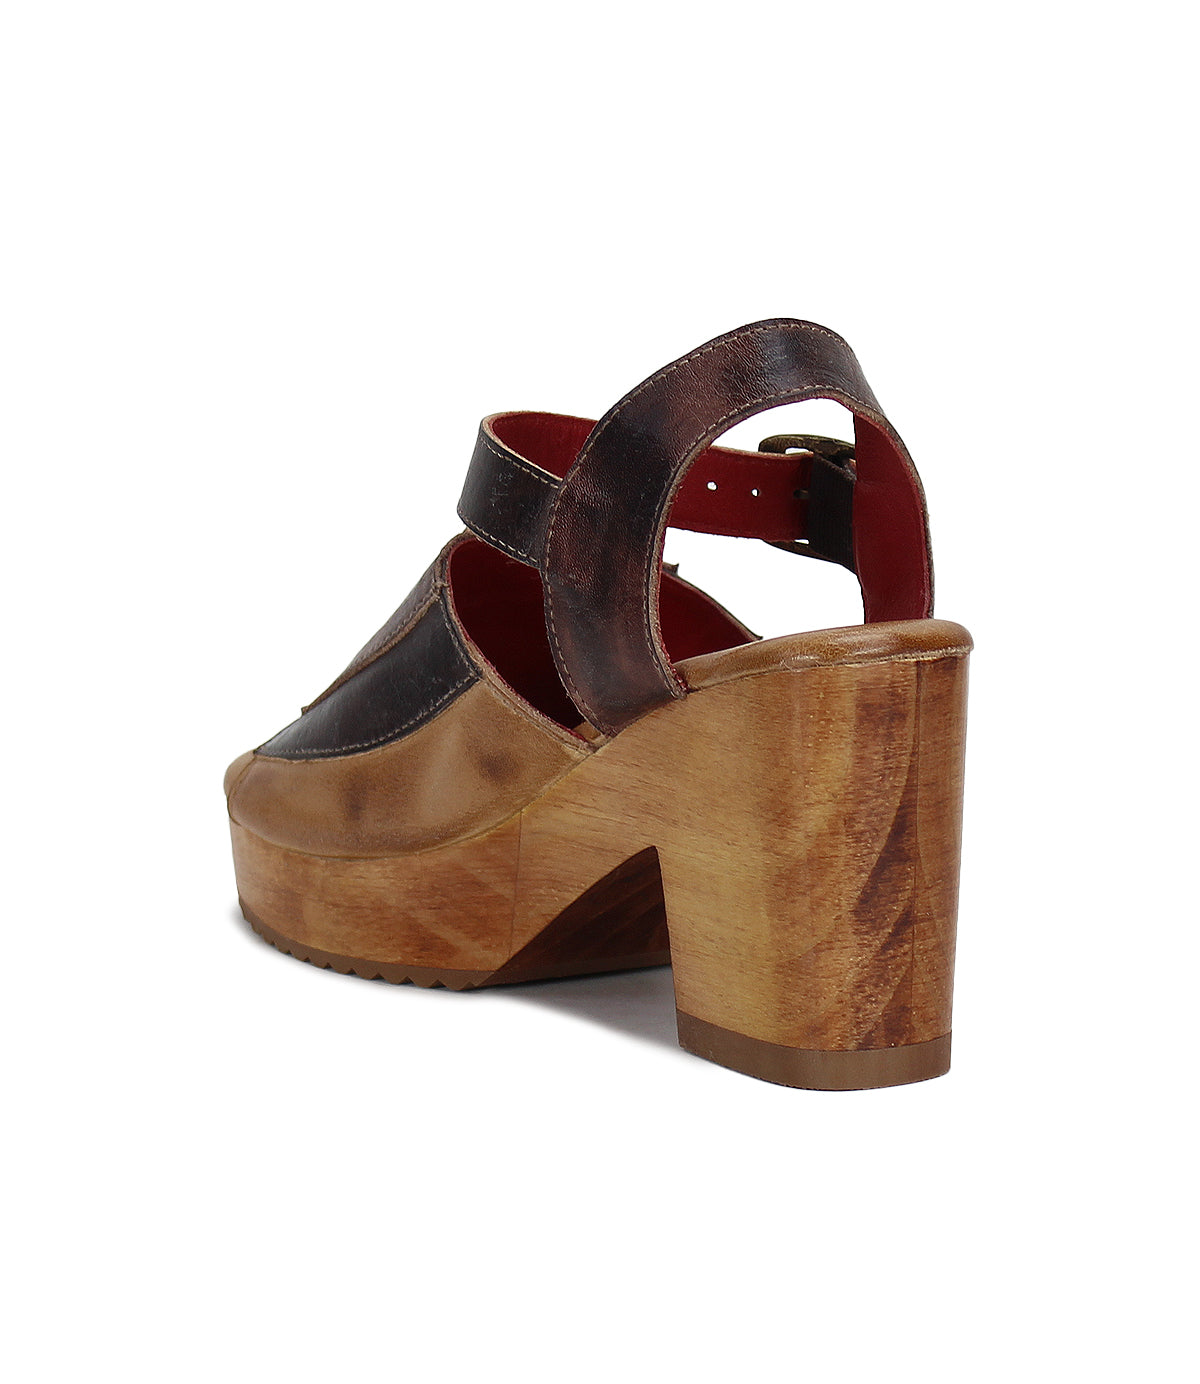 A pair of Jetsetter sandals by Bed Stu with leather heels.